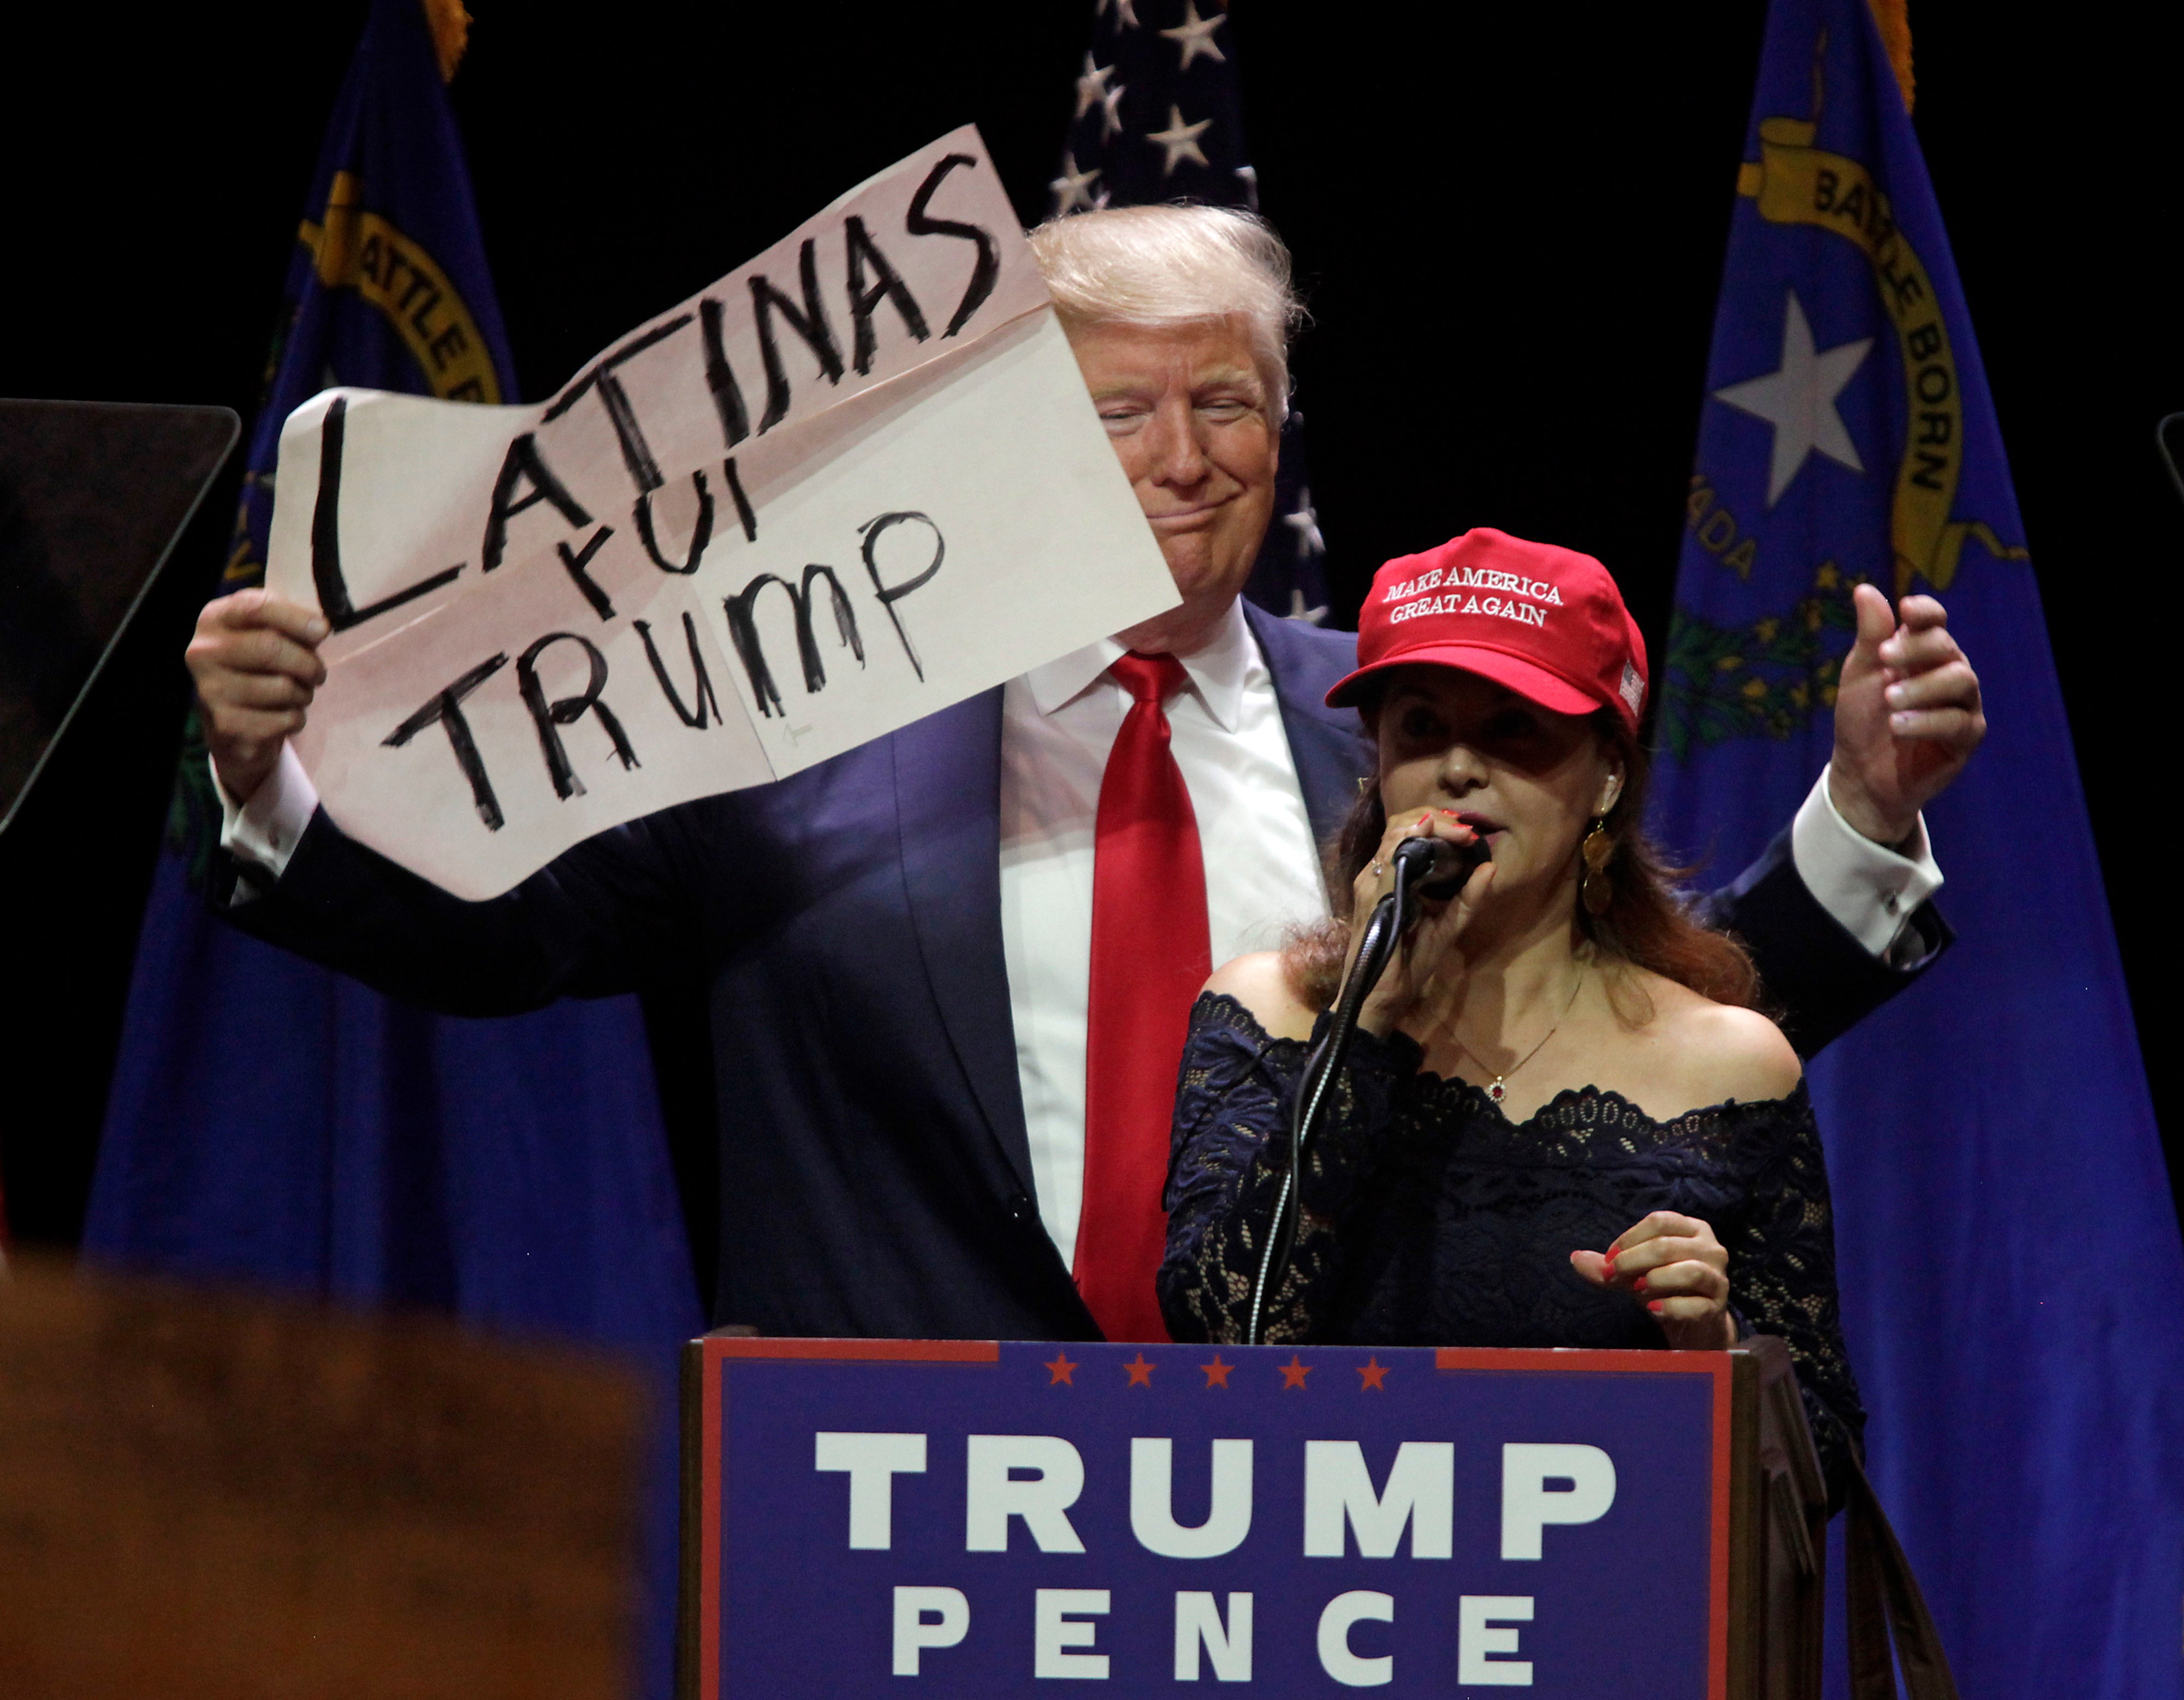 The battle for the Latino vote is stronger than ever